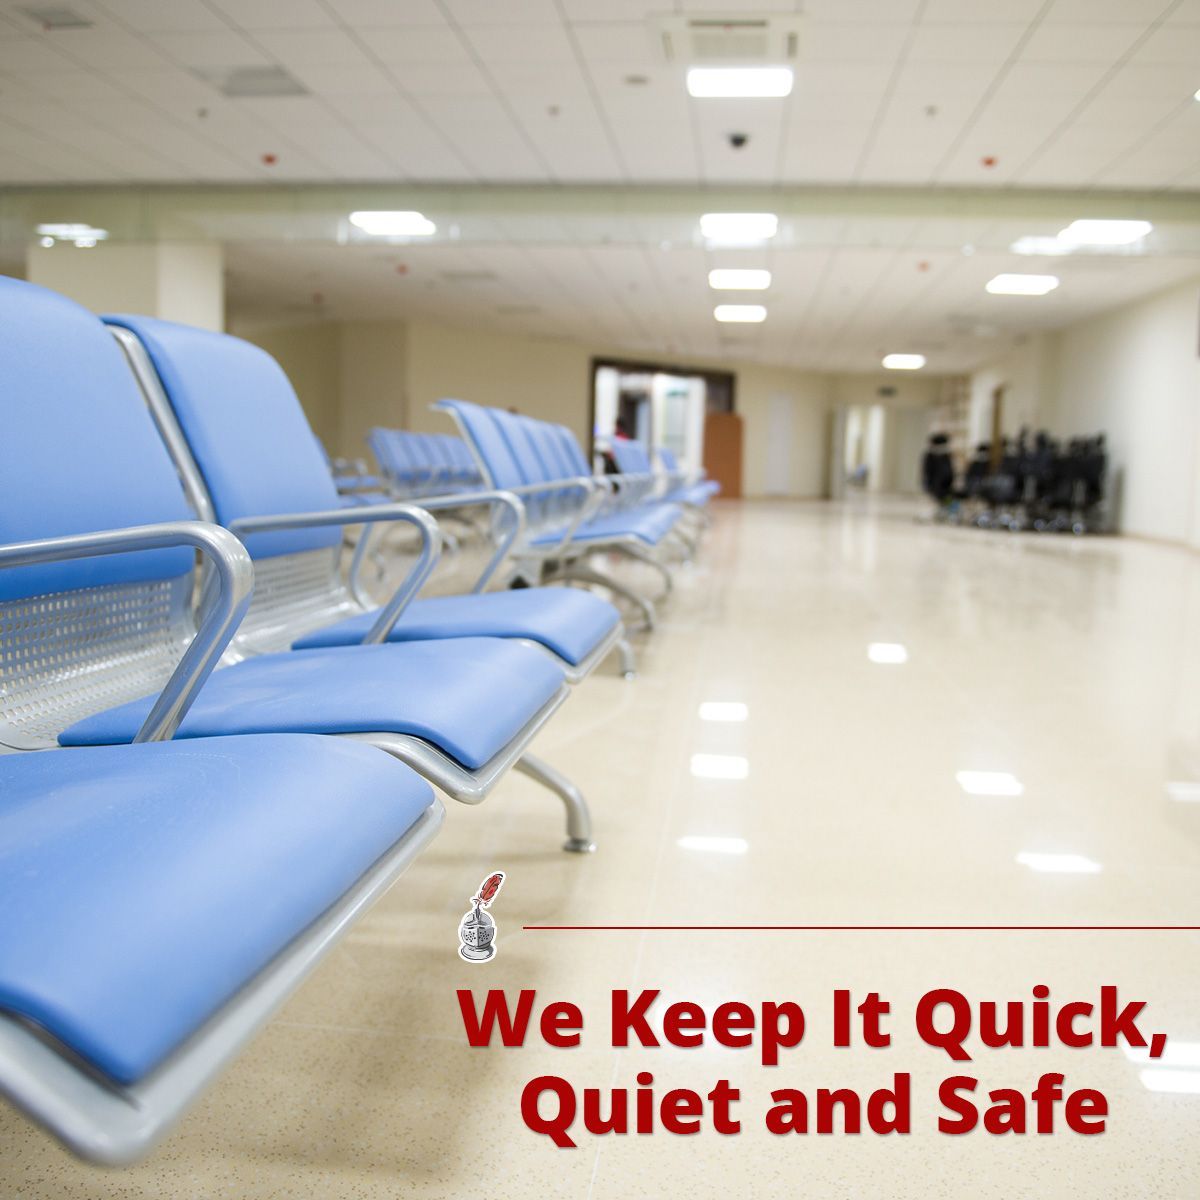 We Keep It Quick, Quiet and Safe